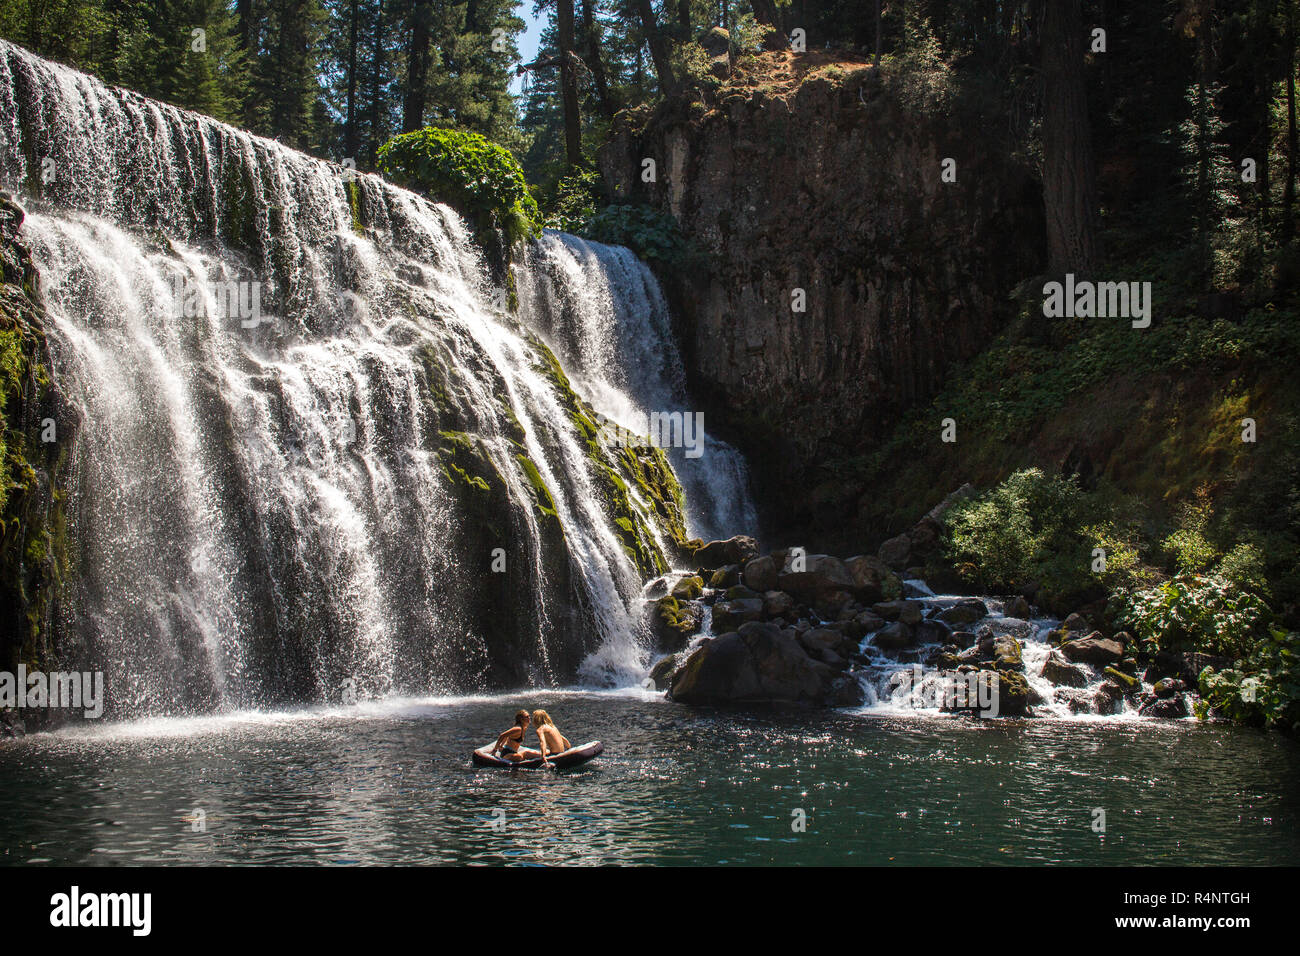 Distant view of couple in raft floating on water near waterfall, Â McCloudÂ River, California, USA Stock Photo